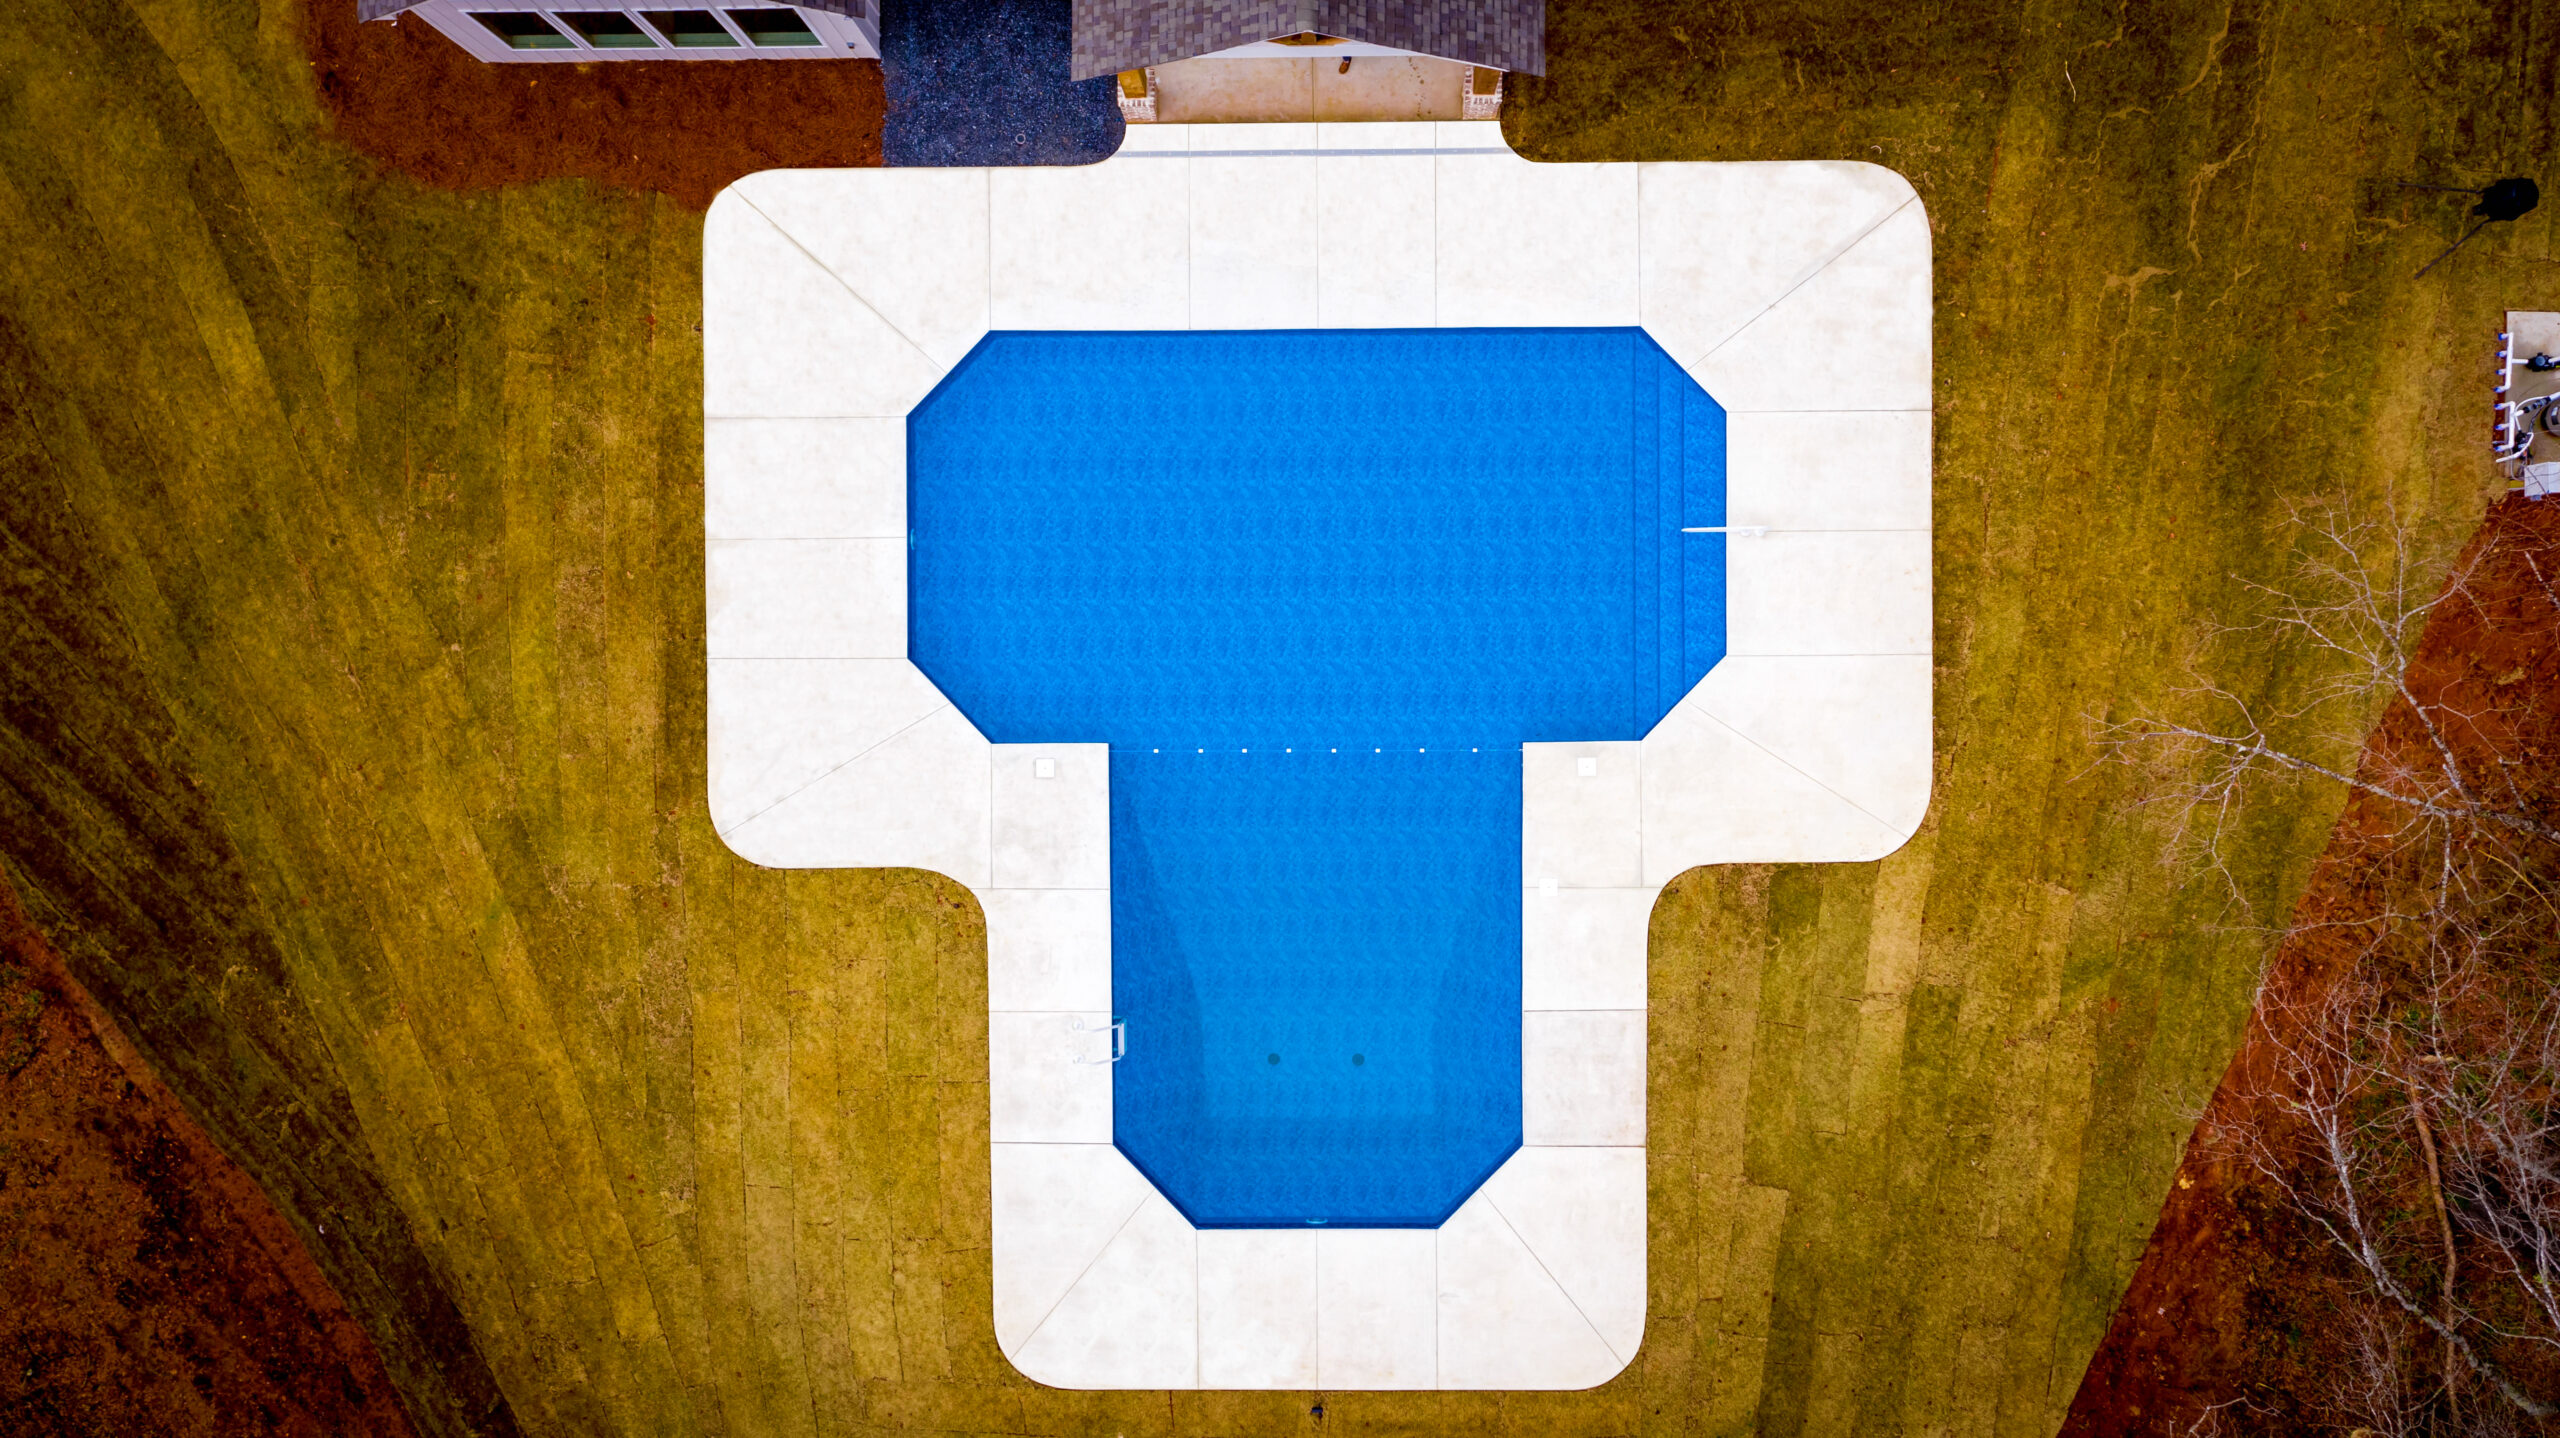 What Pool Shape Works Best for Your Yard?